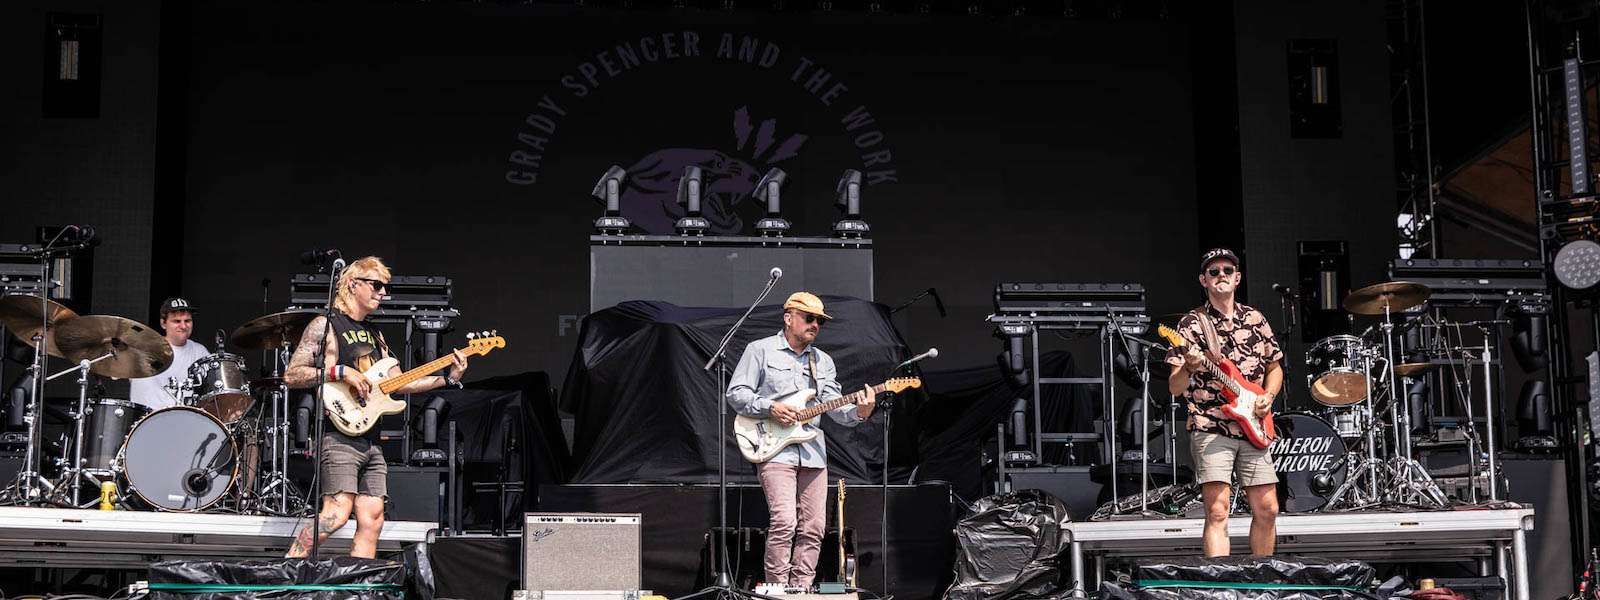 Grady Spencer And The Work Live at Windy City Smokeout [GALLERY]